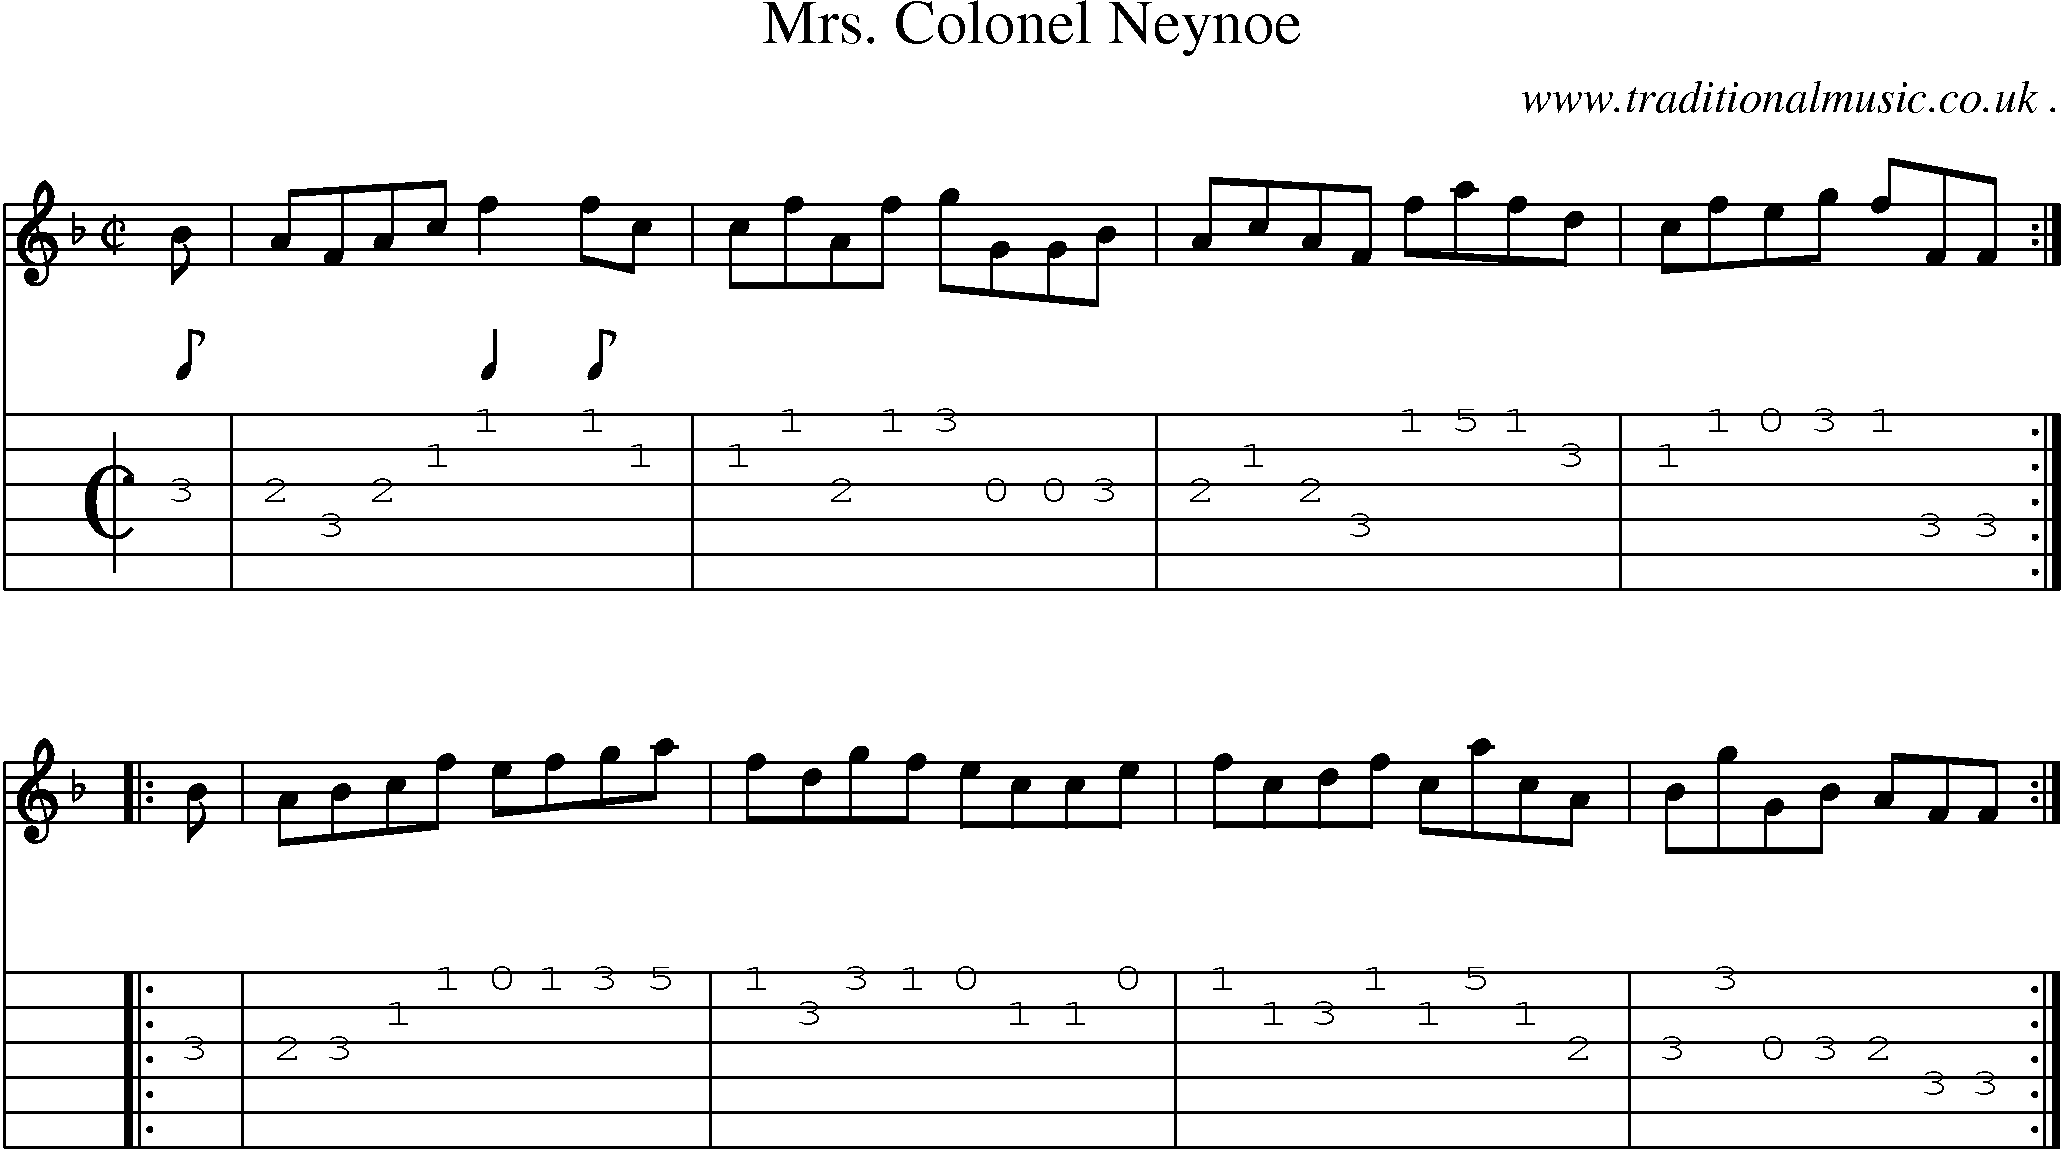 Sheet-music  score, Chords and Guitar Tabs for Mrs Colonel Neynoe